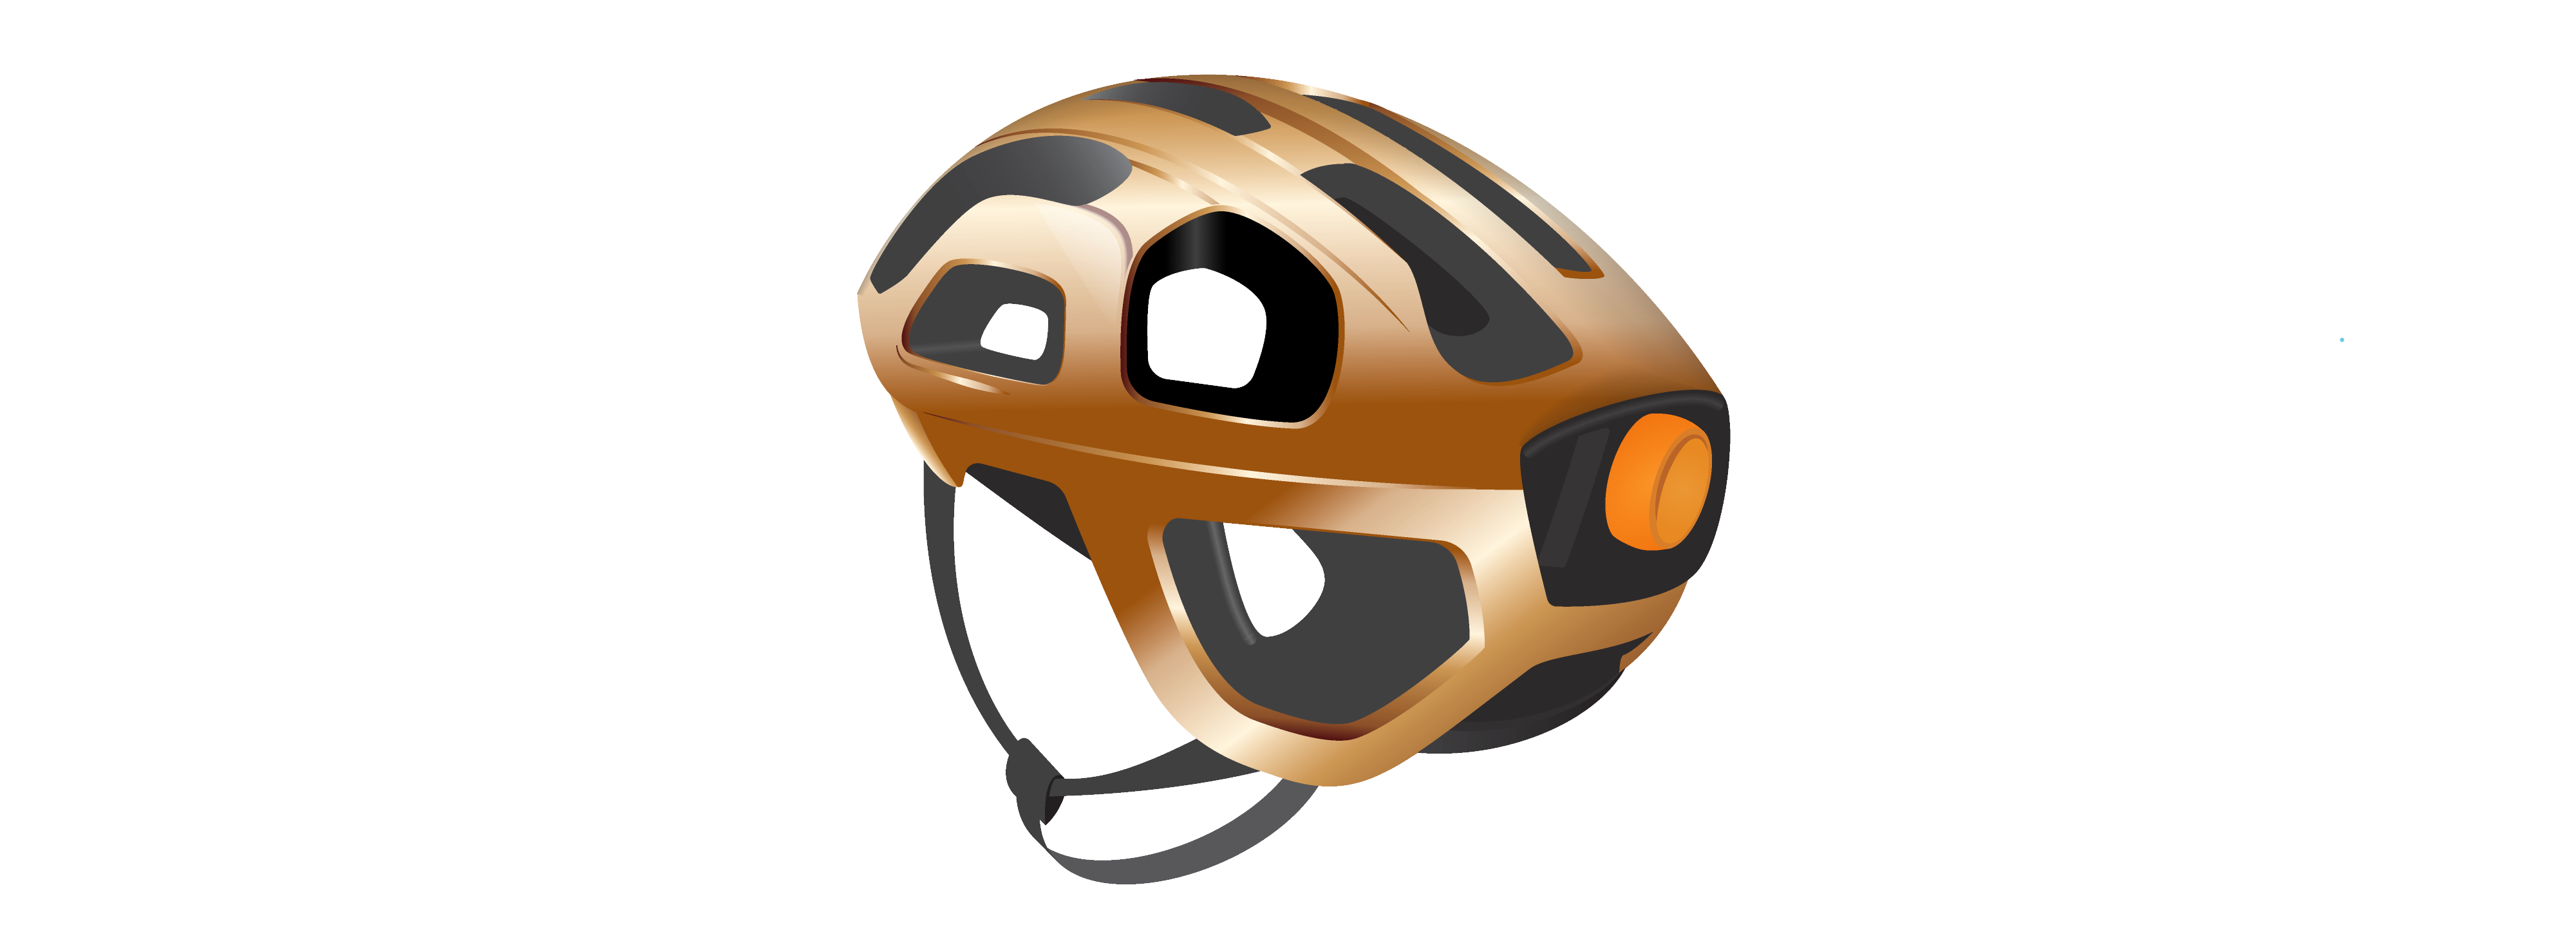 Metallic-coloured sports helmet with many holes. Each hole is lined by contrasting black material. The only bit of colour is an orange adjustable button on a black square at the back of the helmet.